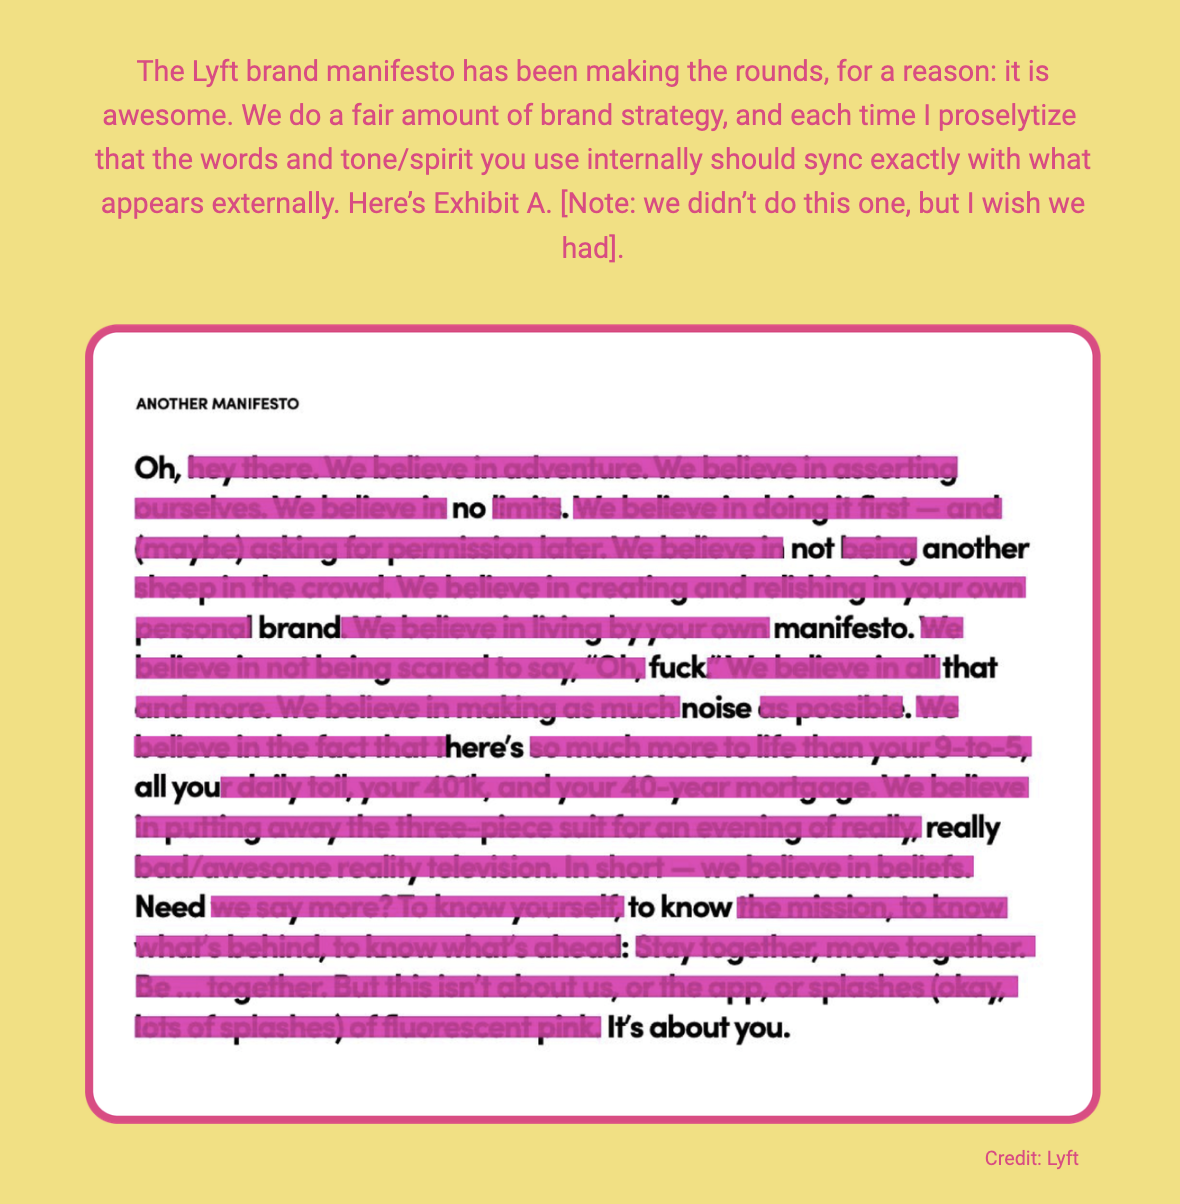 The image displays a section of text that is highlighted as a brand manifesto from Lyft. The text praises the manifesto for its alignment with the company's external image and messaging, expressing a wish that they had been involved in its creation. The manifesto itself speaks to themes of adventure, self-assertion, and individuality, rejecting conventional limits and embracing personal branding and expression. It uses bold language to encourage not being afraid to stand out or make noise, and emphasizes living life to its fullest rather than adhering to a monotonous routine. The manifesto concludes by stating that it's about the individual, not the company.

The visible text in the image reads:
"The Lyft brand manifesto has been making the rounds, for a reason: it is awesome. We do a fair amount of brand strategy, and each time I proselytize that the words and tone/spirit you use internally should sync exactly with what appears externally. Here’s Exhibit A. [Note: we didn’t do this one, but I wish we had].

Credit: Lyft"